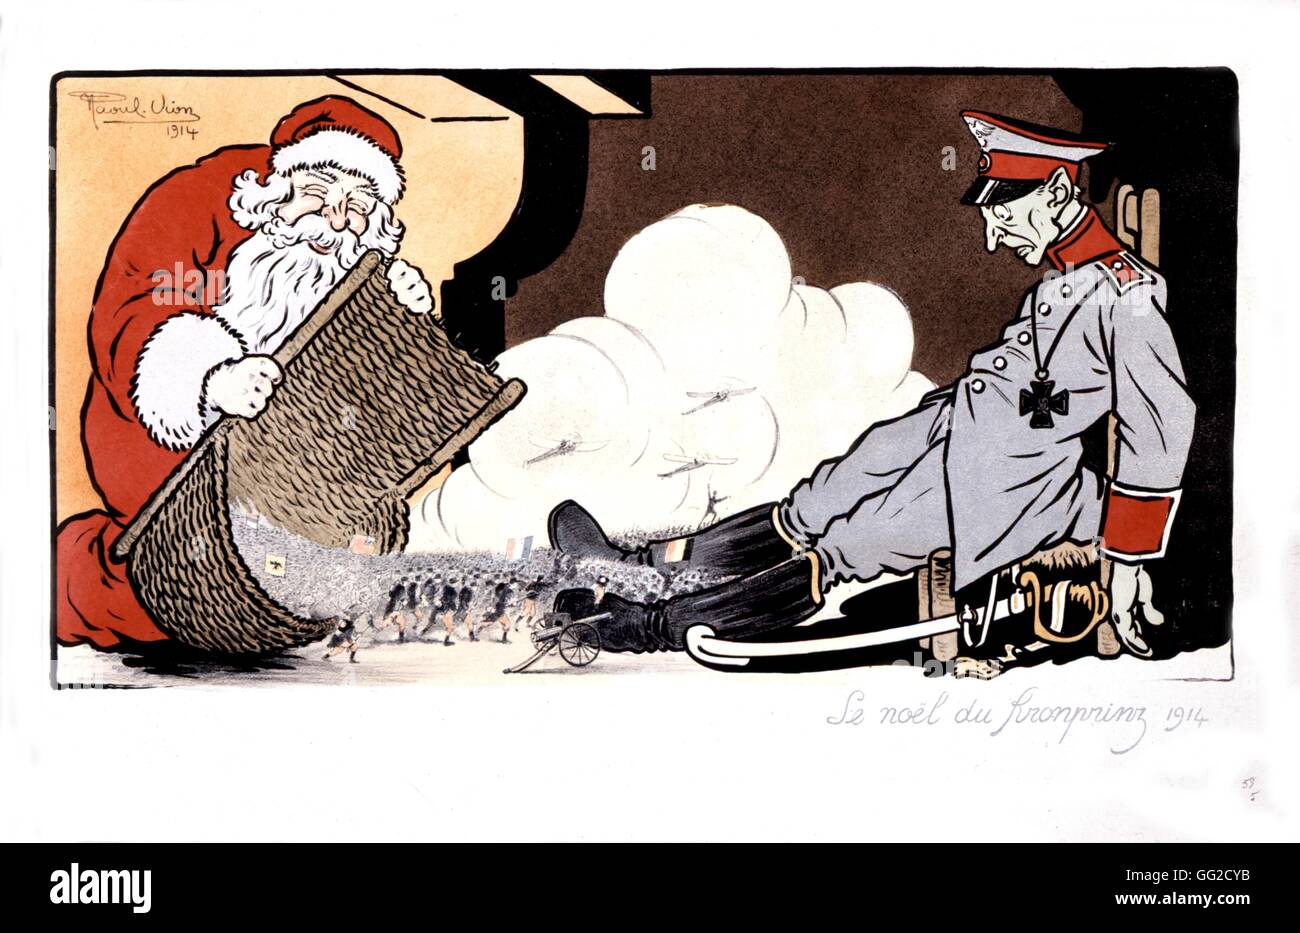 Caricature against the Germans in France 1914 France - World War I Stock Photo